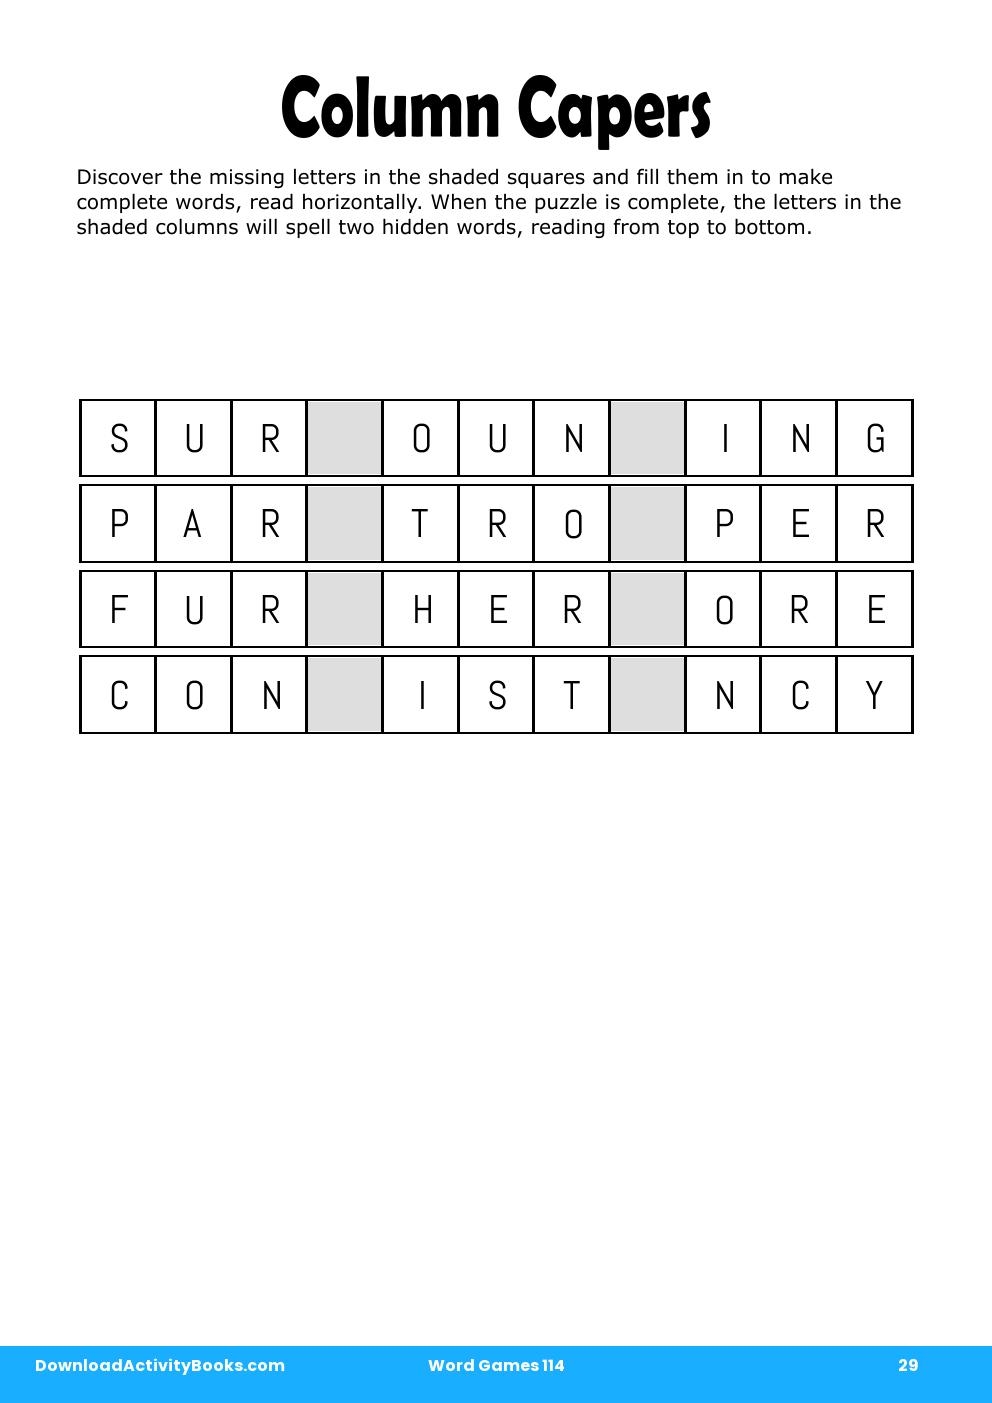 Column Capers in Word Games 114